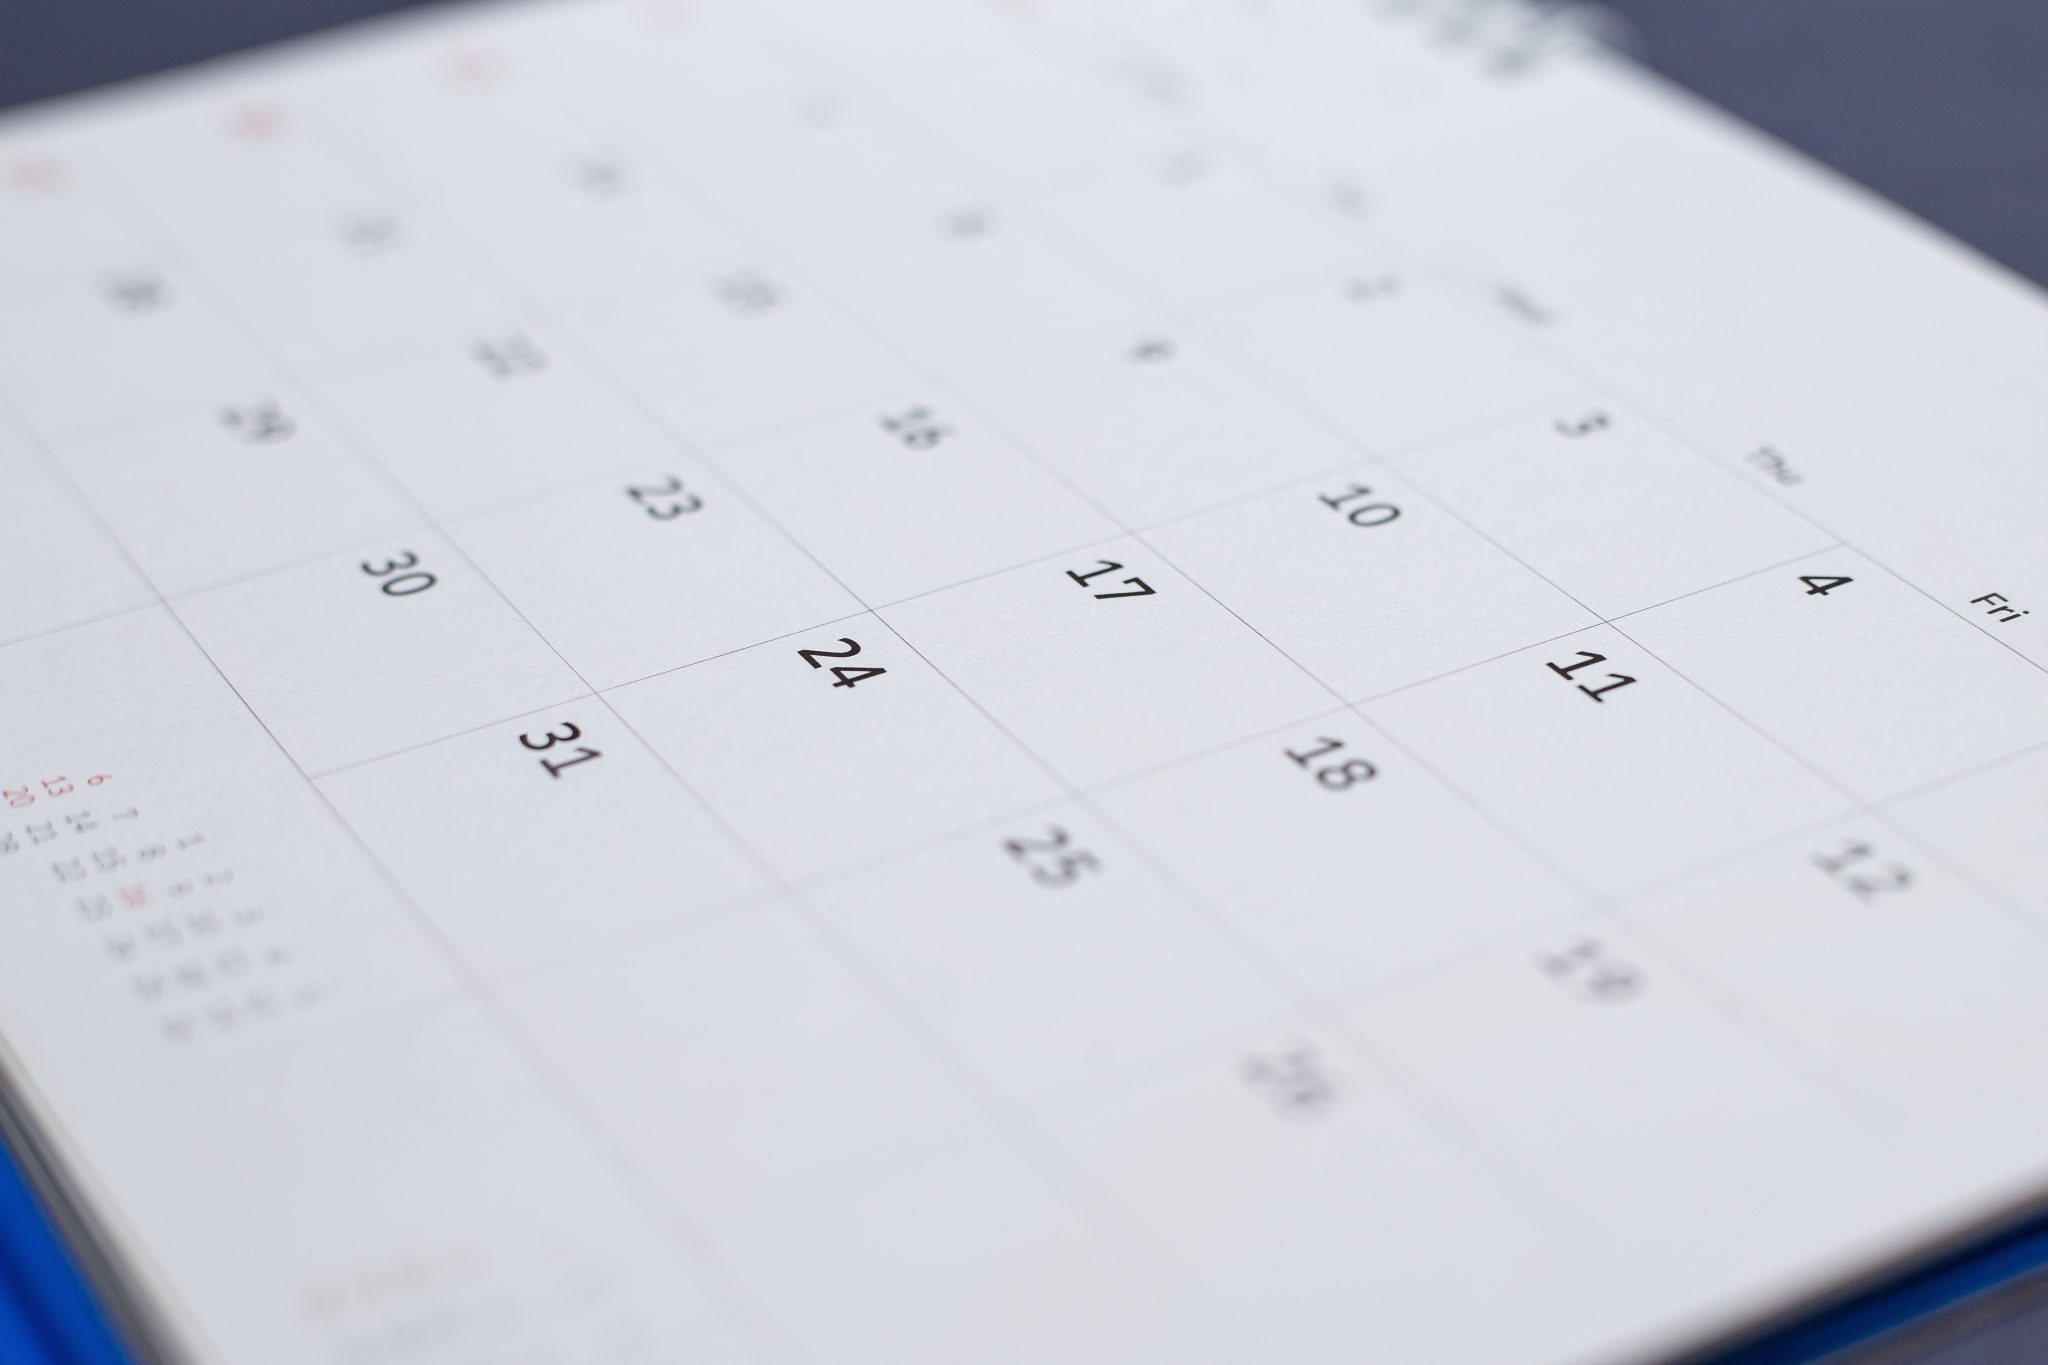 The month view of a calendar